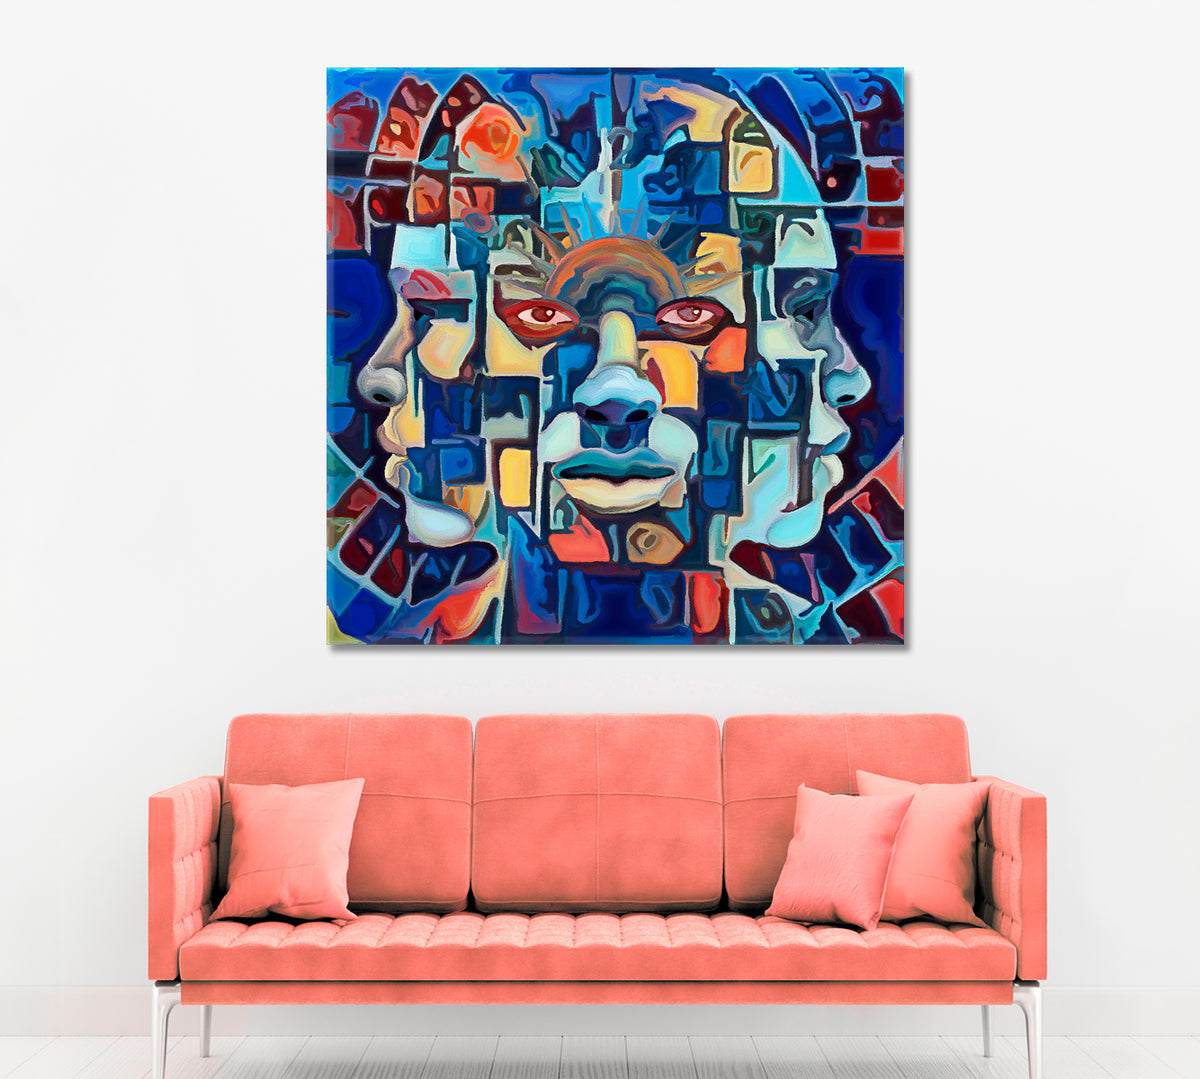 PRESENT PAST FUTURE Three Faces Abstract Art Print Artesty 1 Panel 12"x12" 